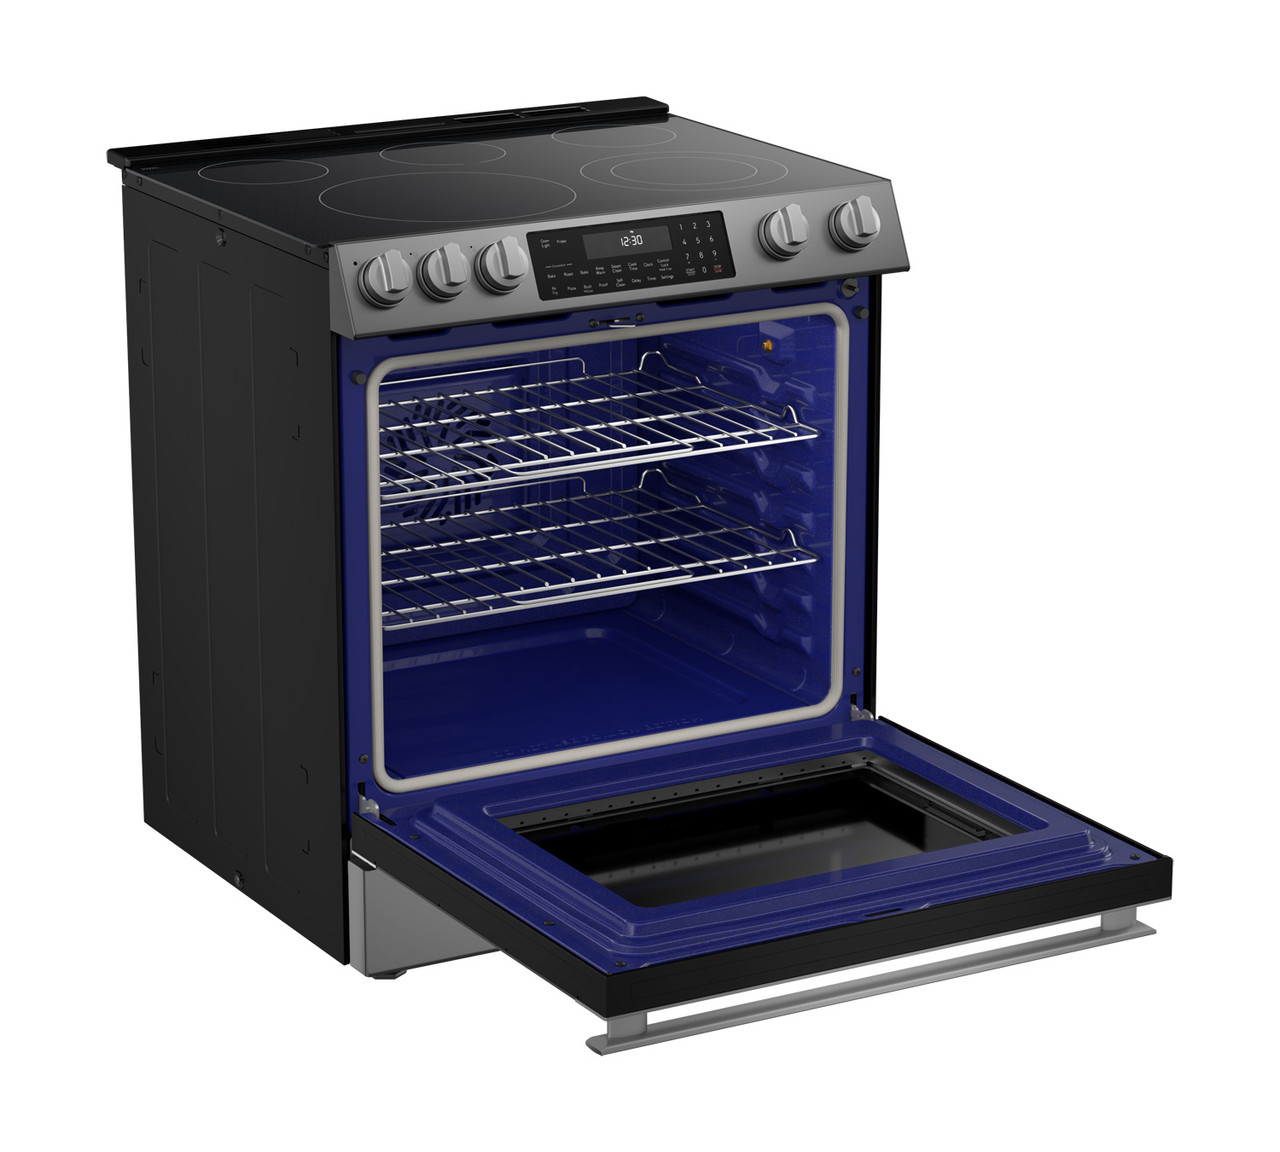 30 in. Electric Convection Slide-In Range with Air Fry (SSR3061JS) right angle open